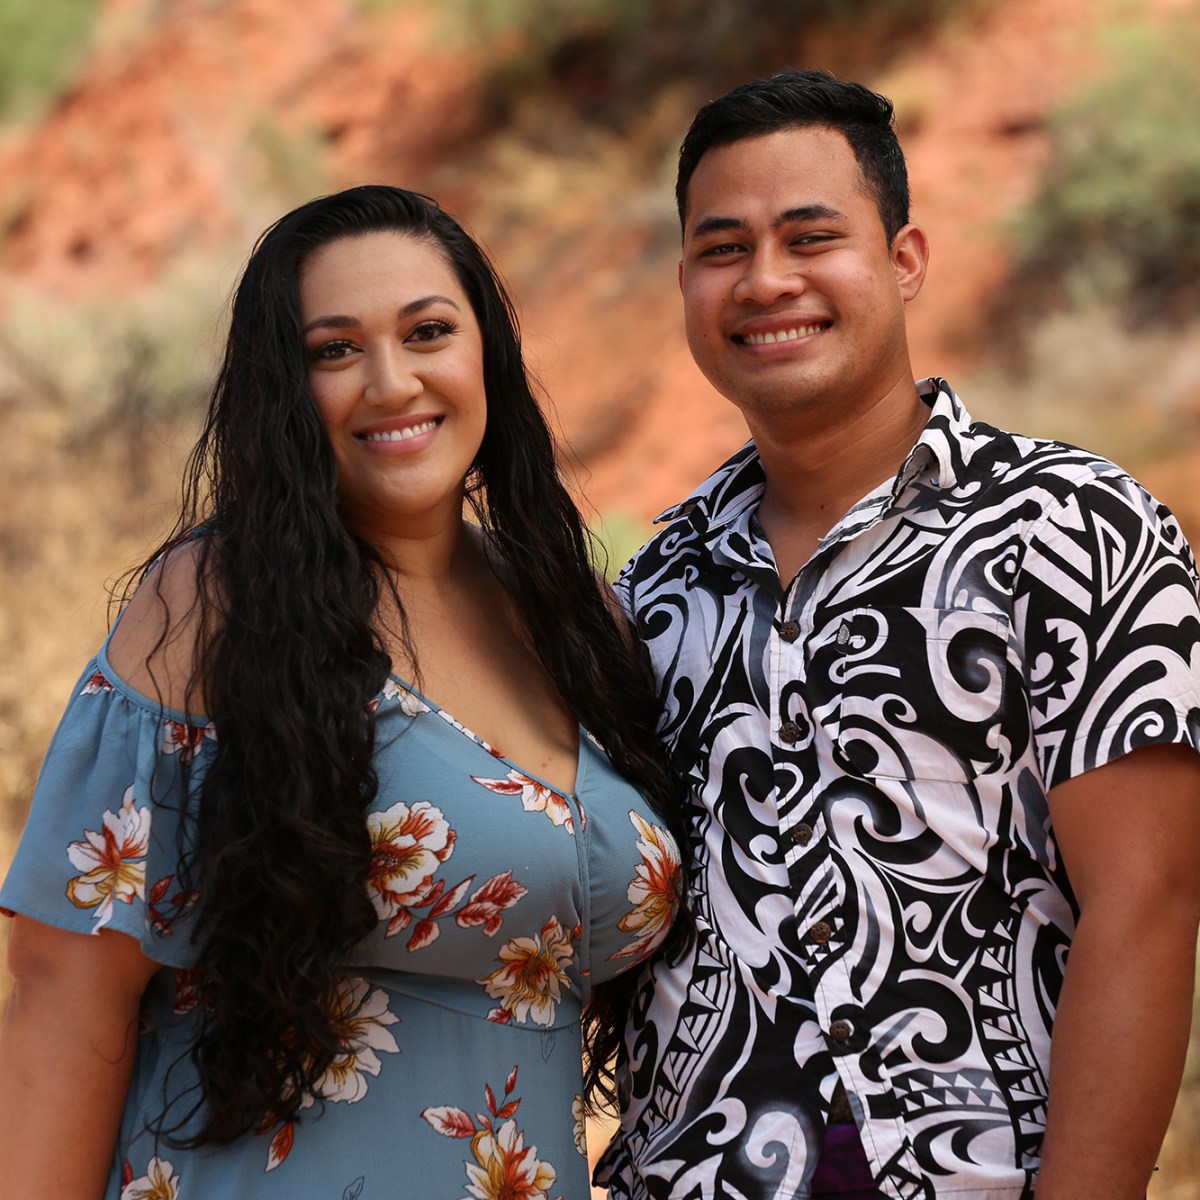 A picture of Kalani and Asuelu, with Kalani wearing a maroon and cream checkered shirt and Asuelu wearing a navy t-shirt.